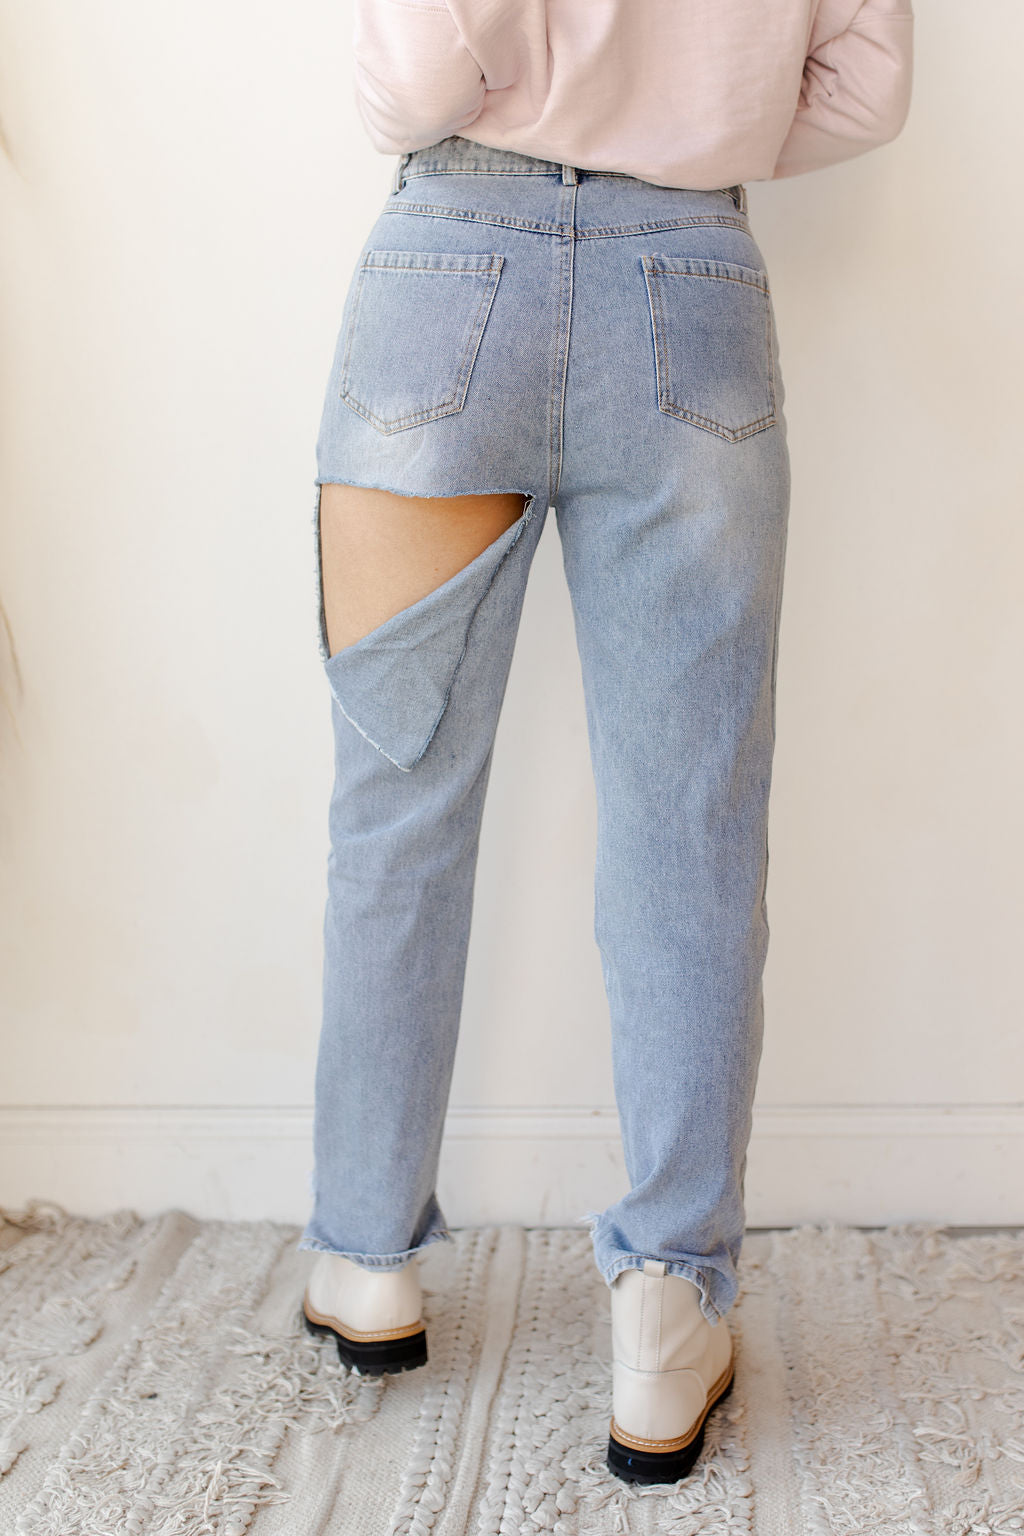 jeans with back cut out